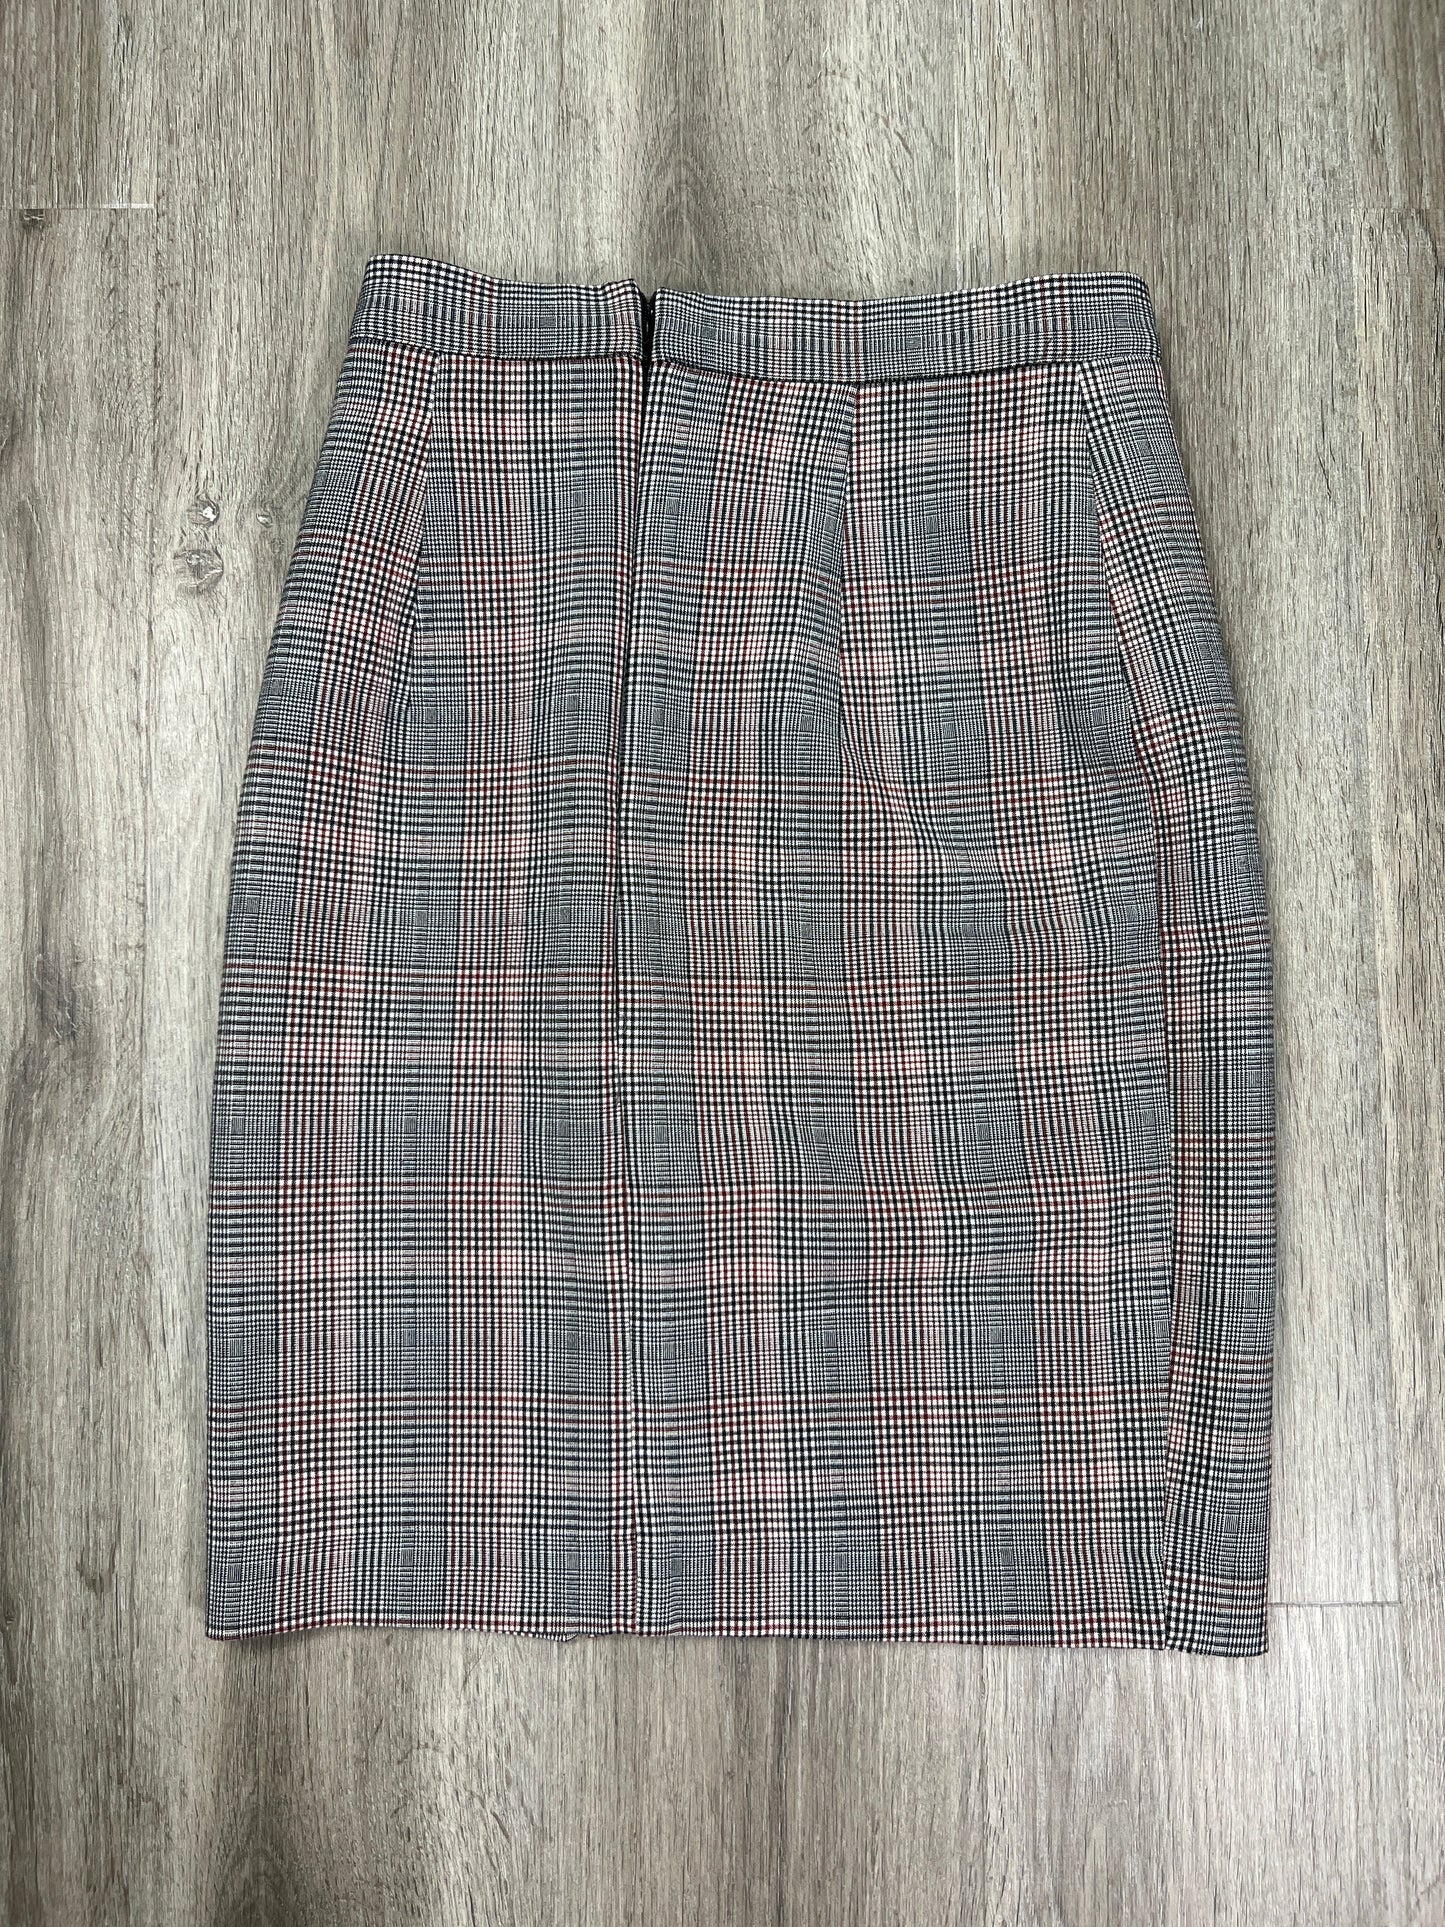 Skirt Mini & Short By H&m  Size: S